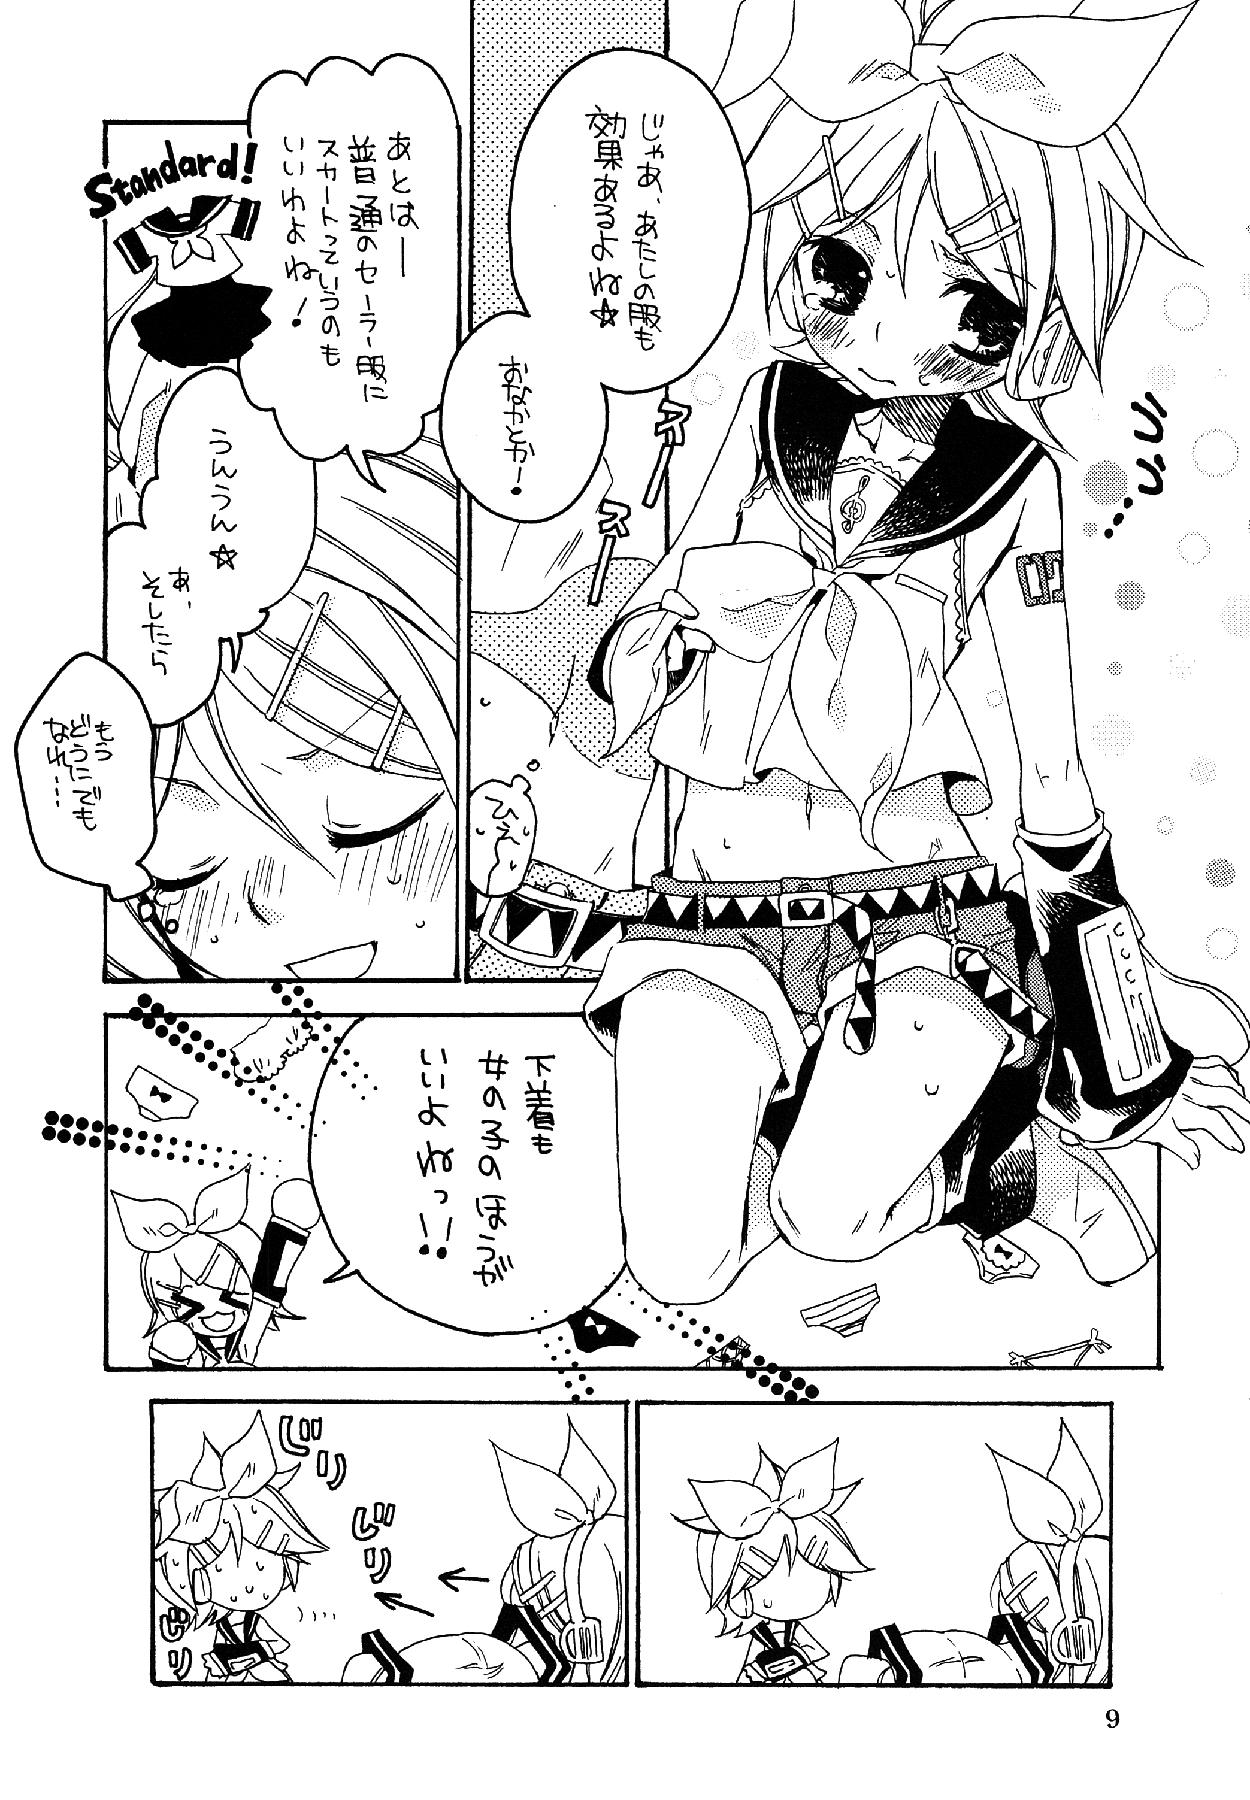 Blow Job Contest Ame ni Utaeba - Vocaloid People Having Sex - Page 9